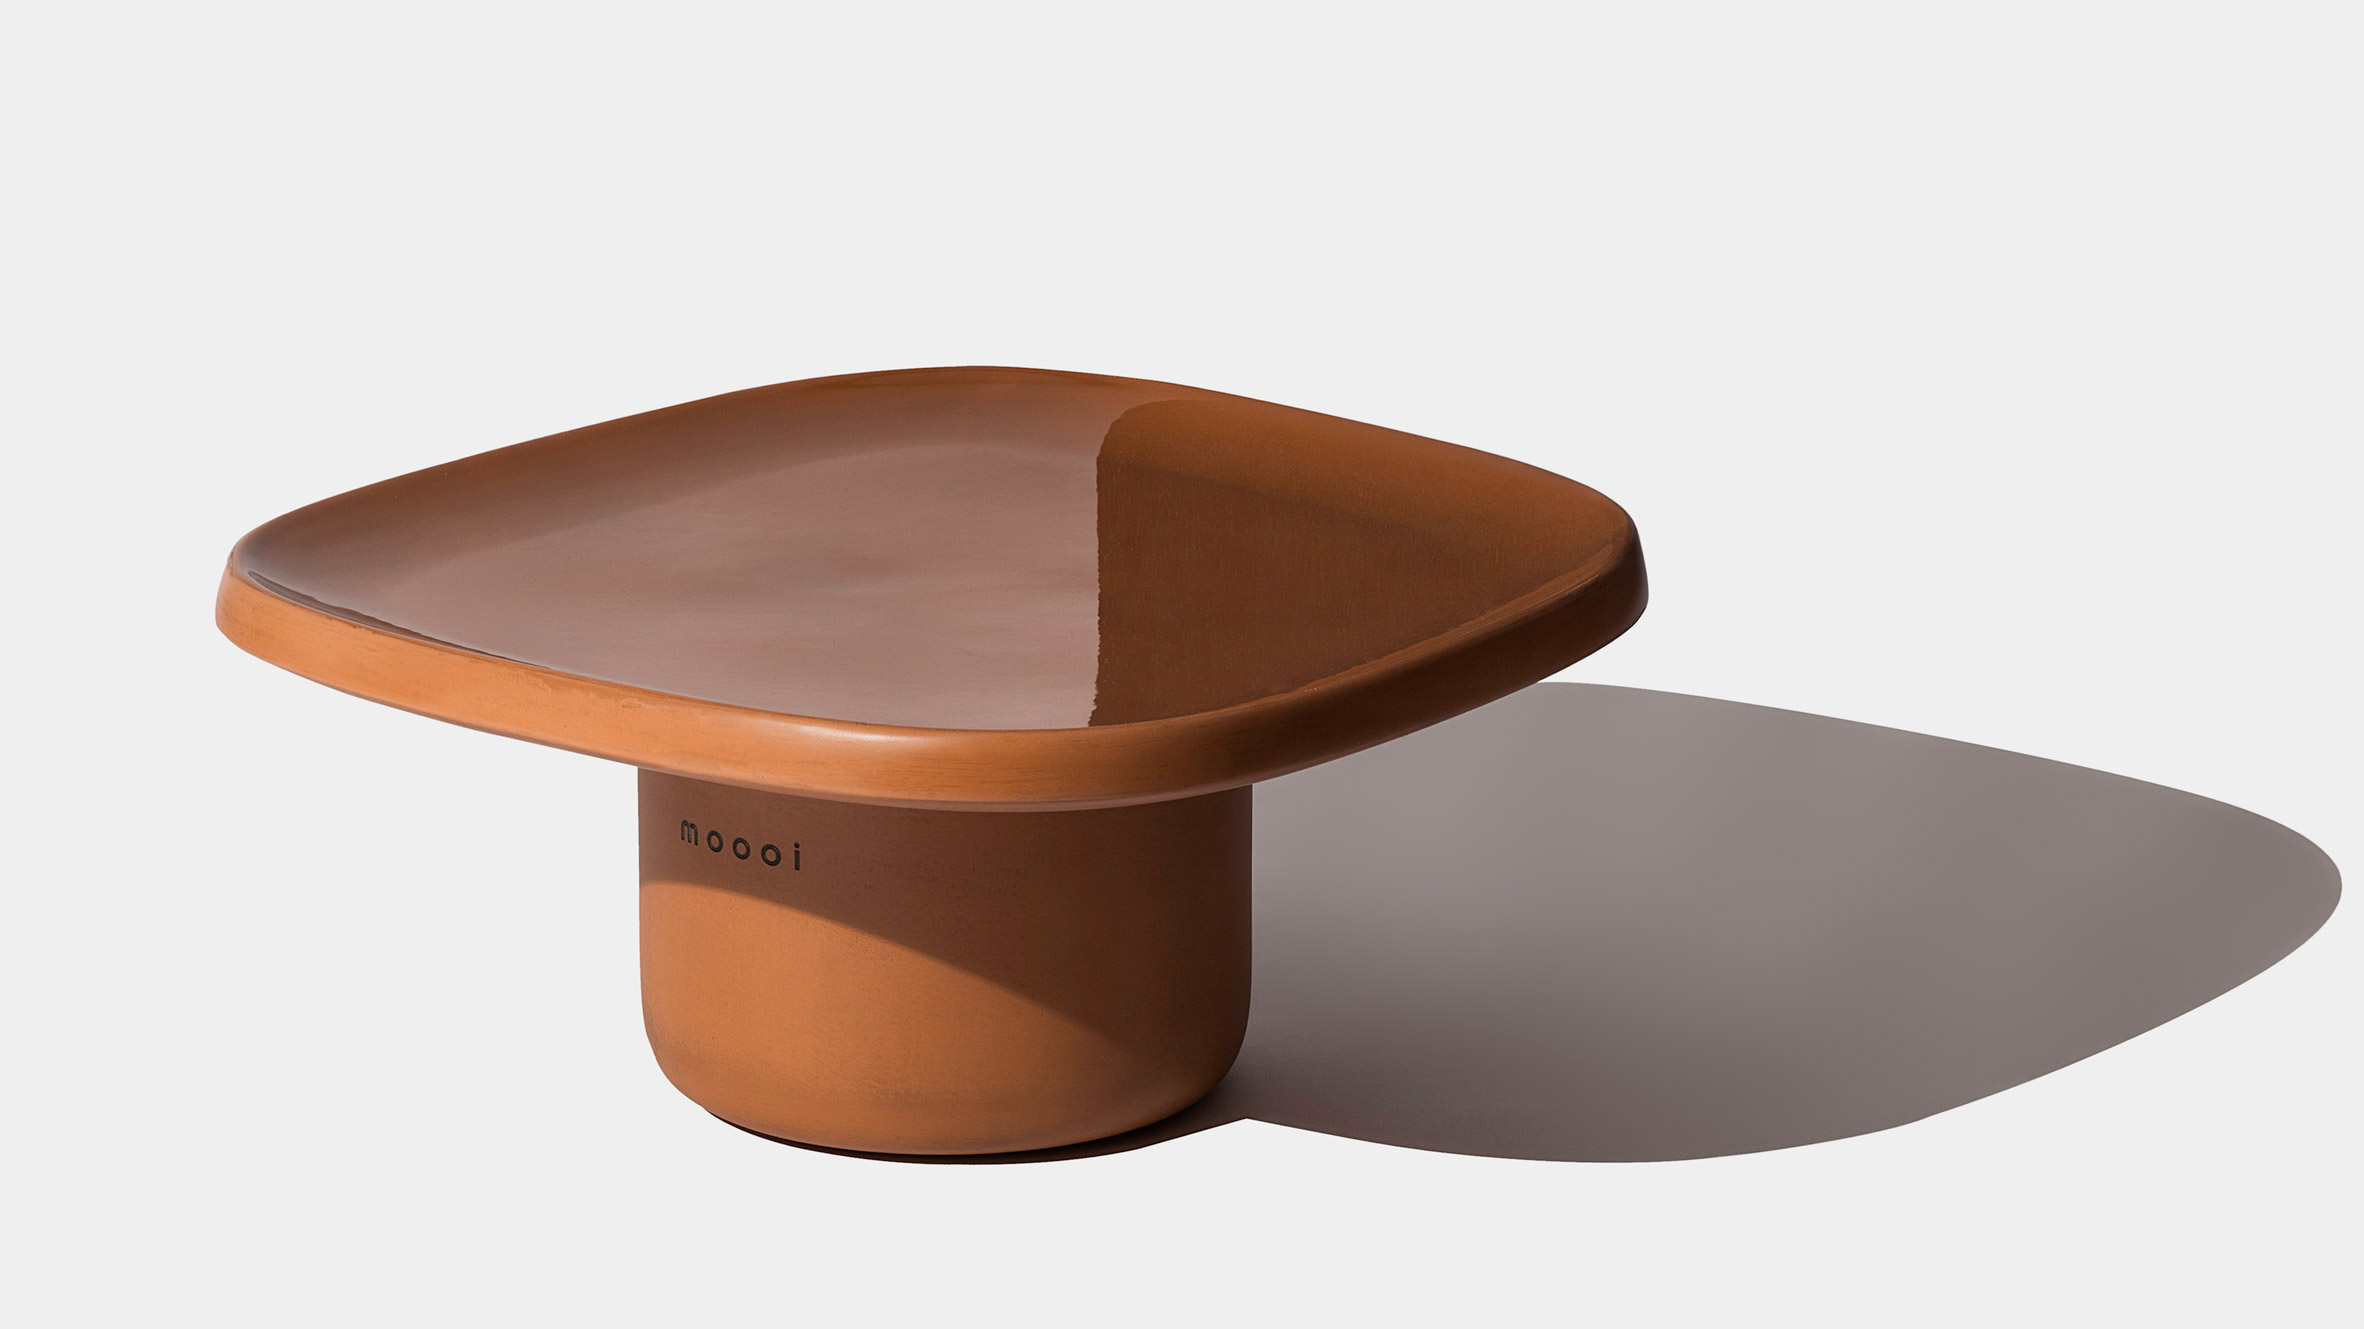 Obon Table for Obon table for Moooi terracotta